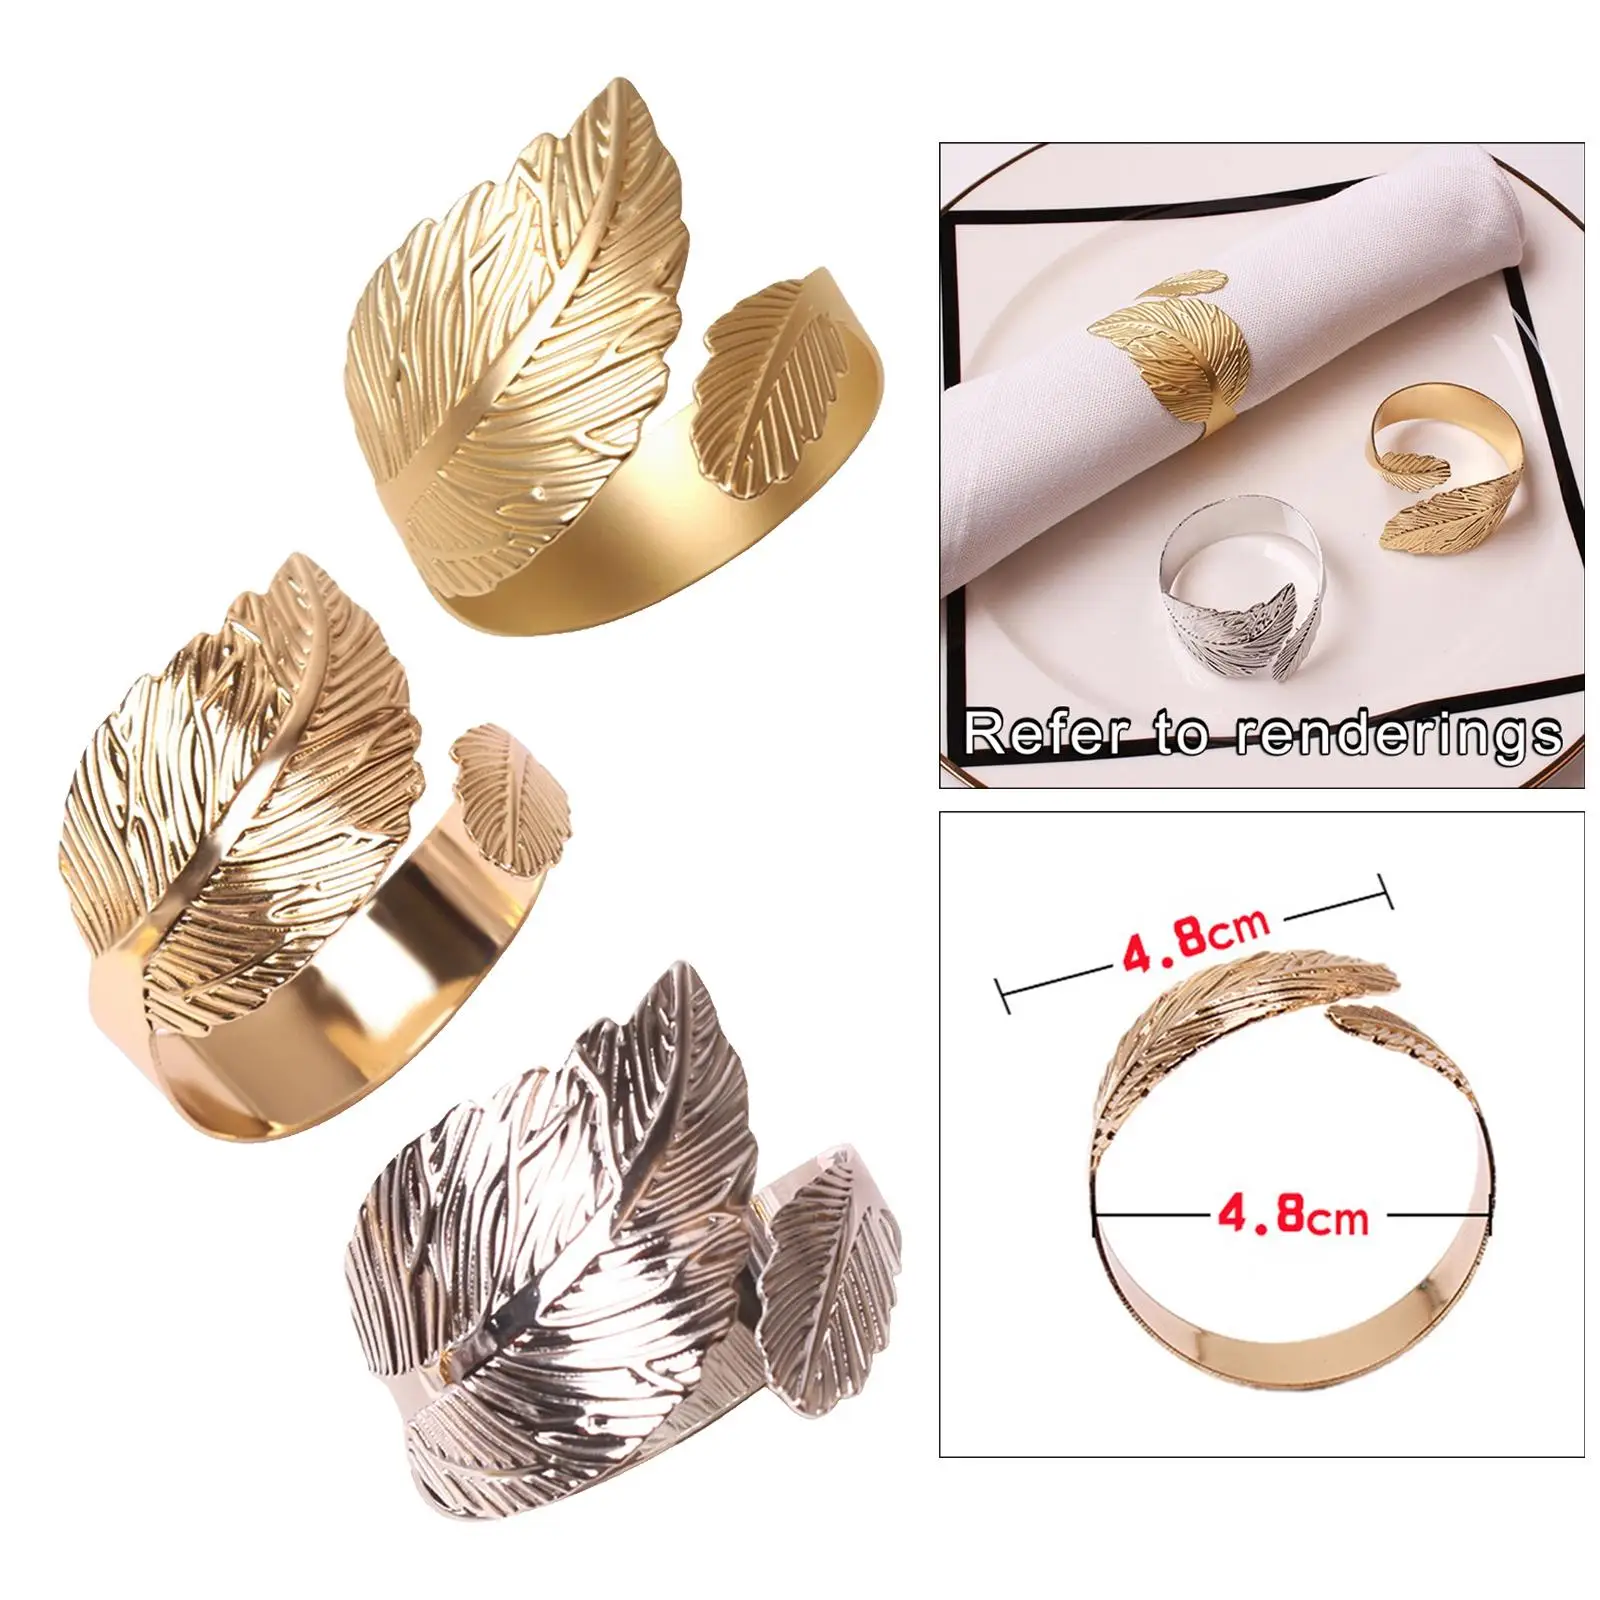 4Pcs Leaf Napkin Buckles Crafts Holder Wedding Event Decor Party Supplies Handmade Feather Napkin Rings for Parties Halloween